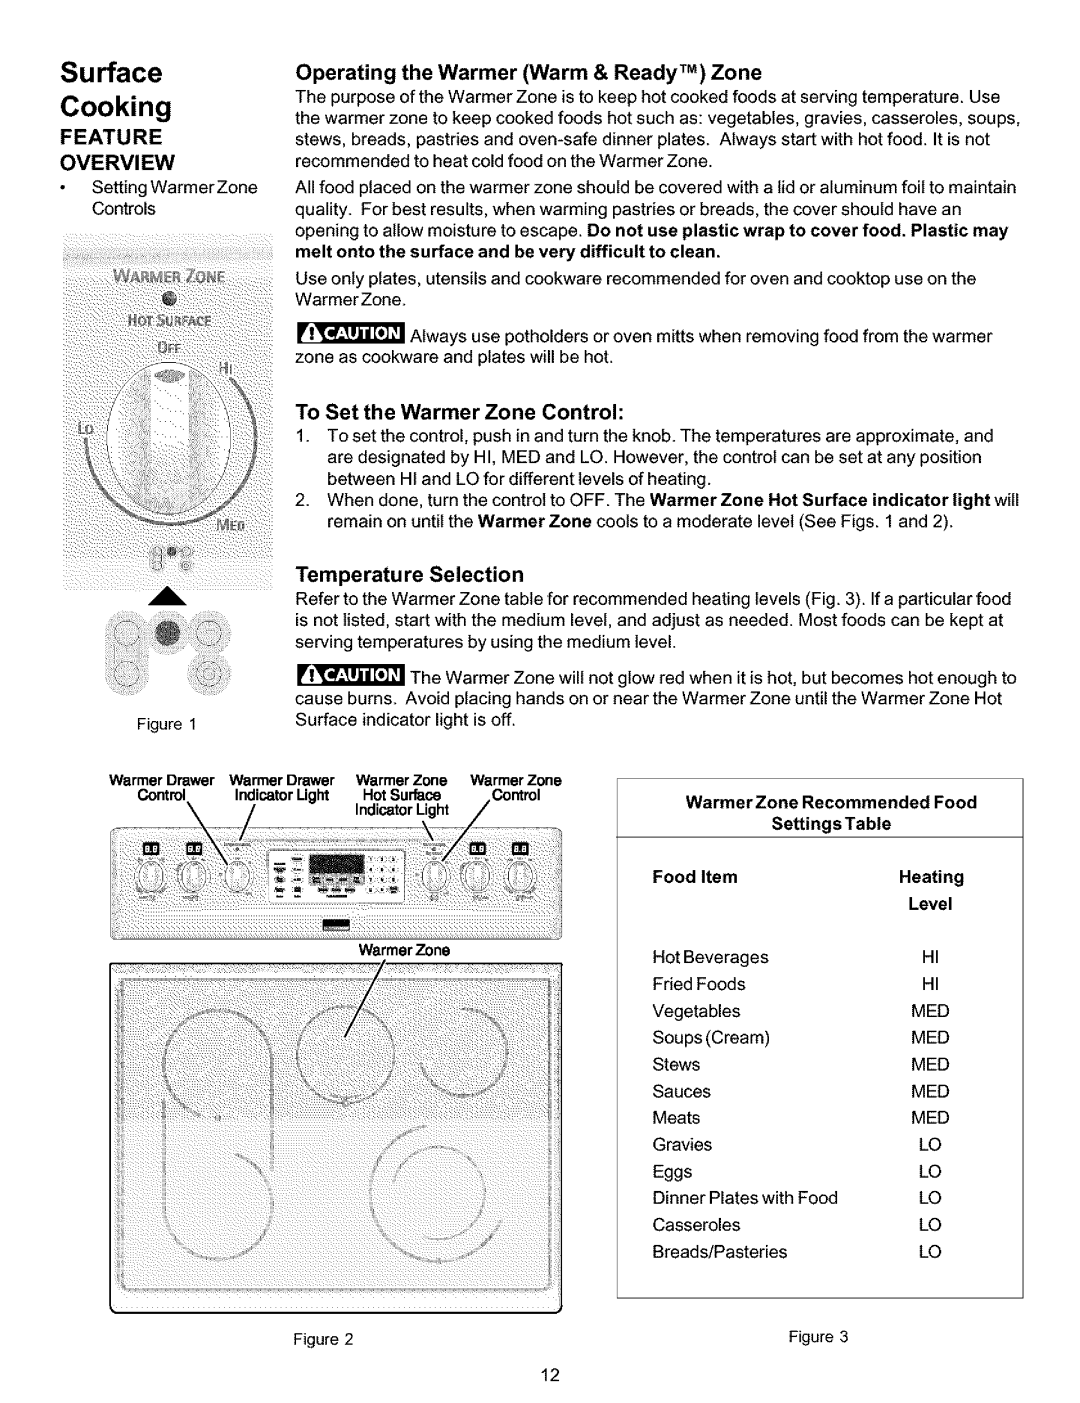 Kenmore 790.99013, 790.99019, 790.99014 manual Surface Cooking, Feature Overview 